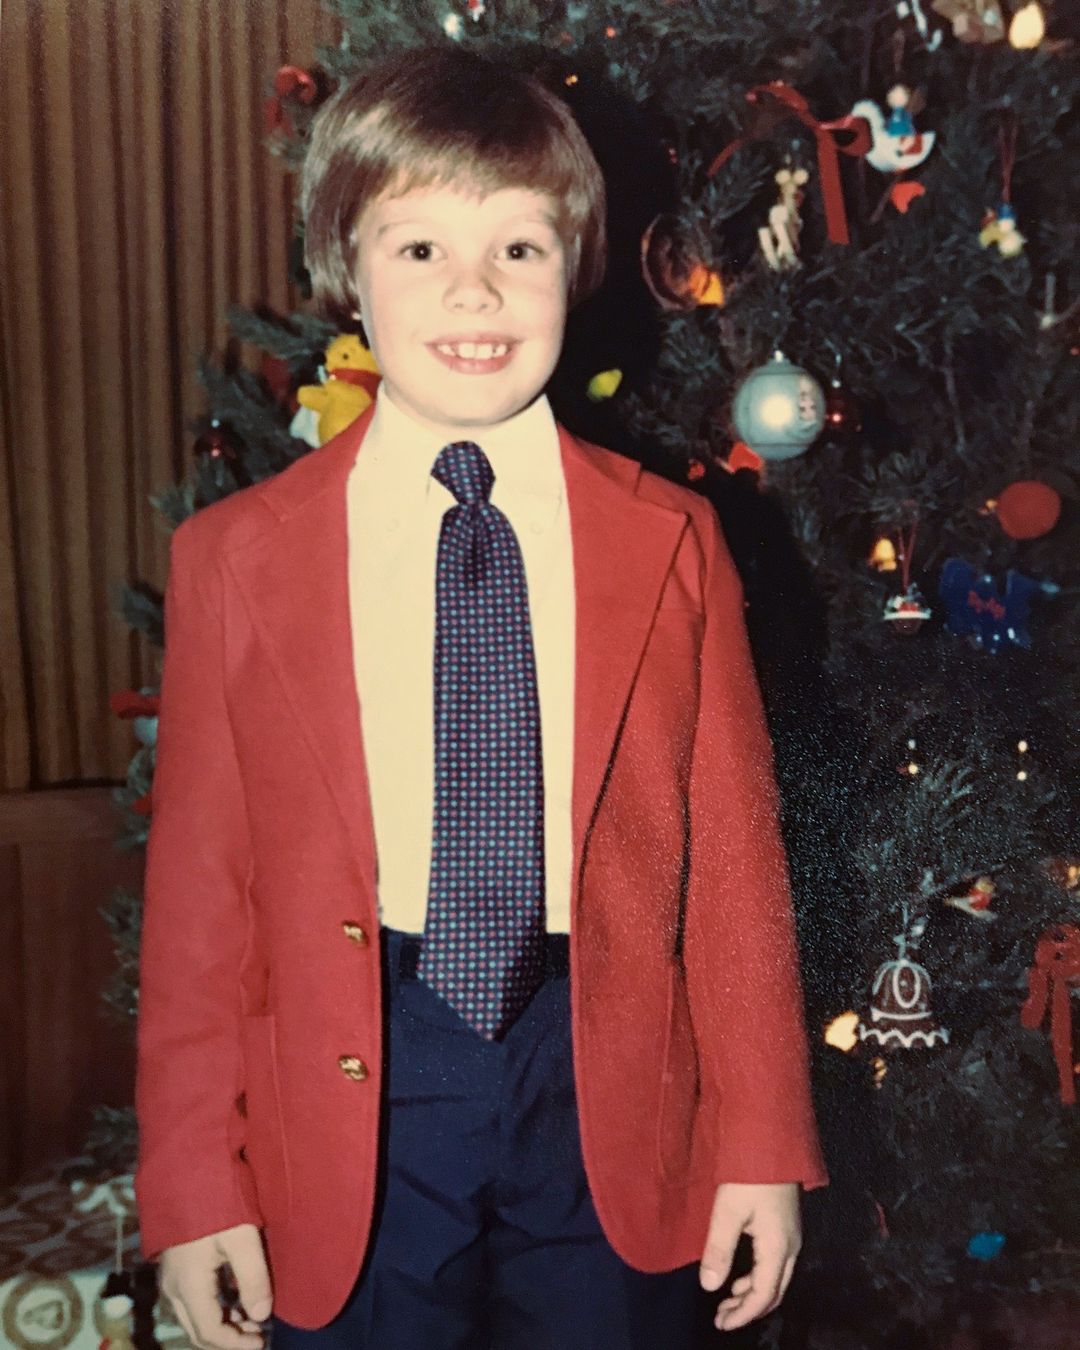 Above, a young Ryan Seacrest smiles in front of a Christmas tree